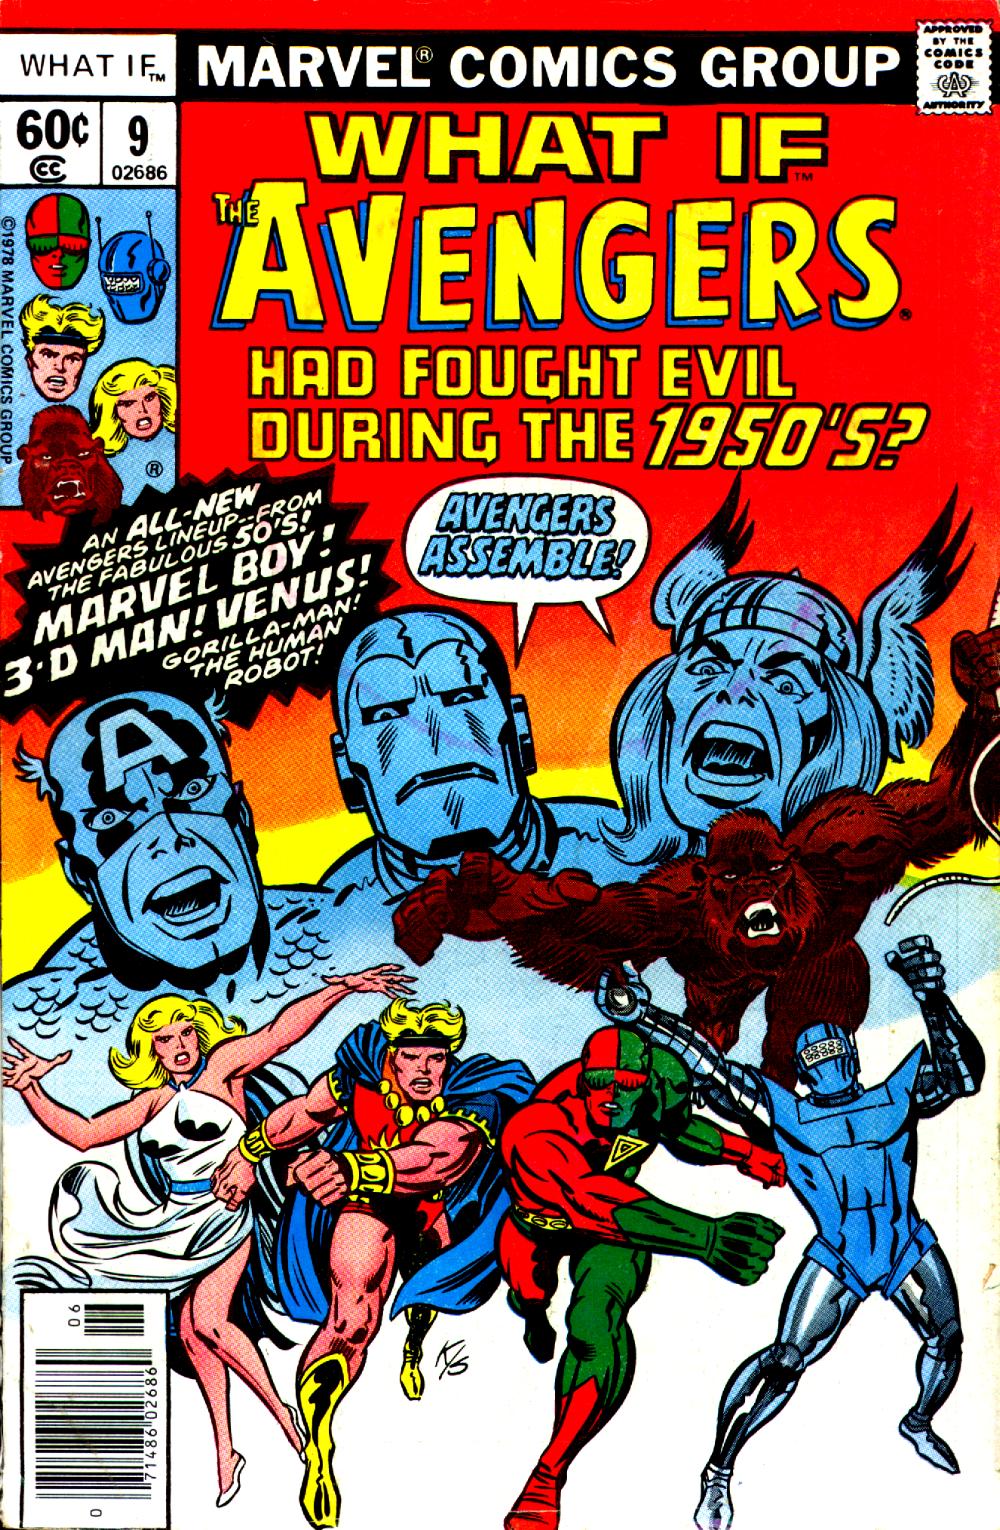 Avengers had fought evil during 50's